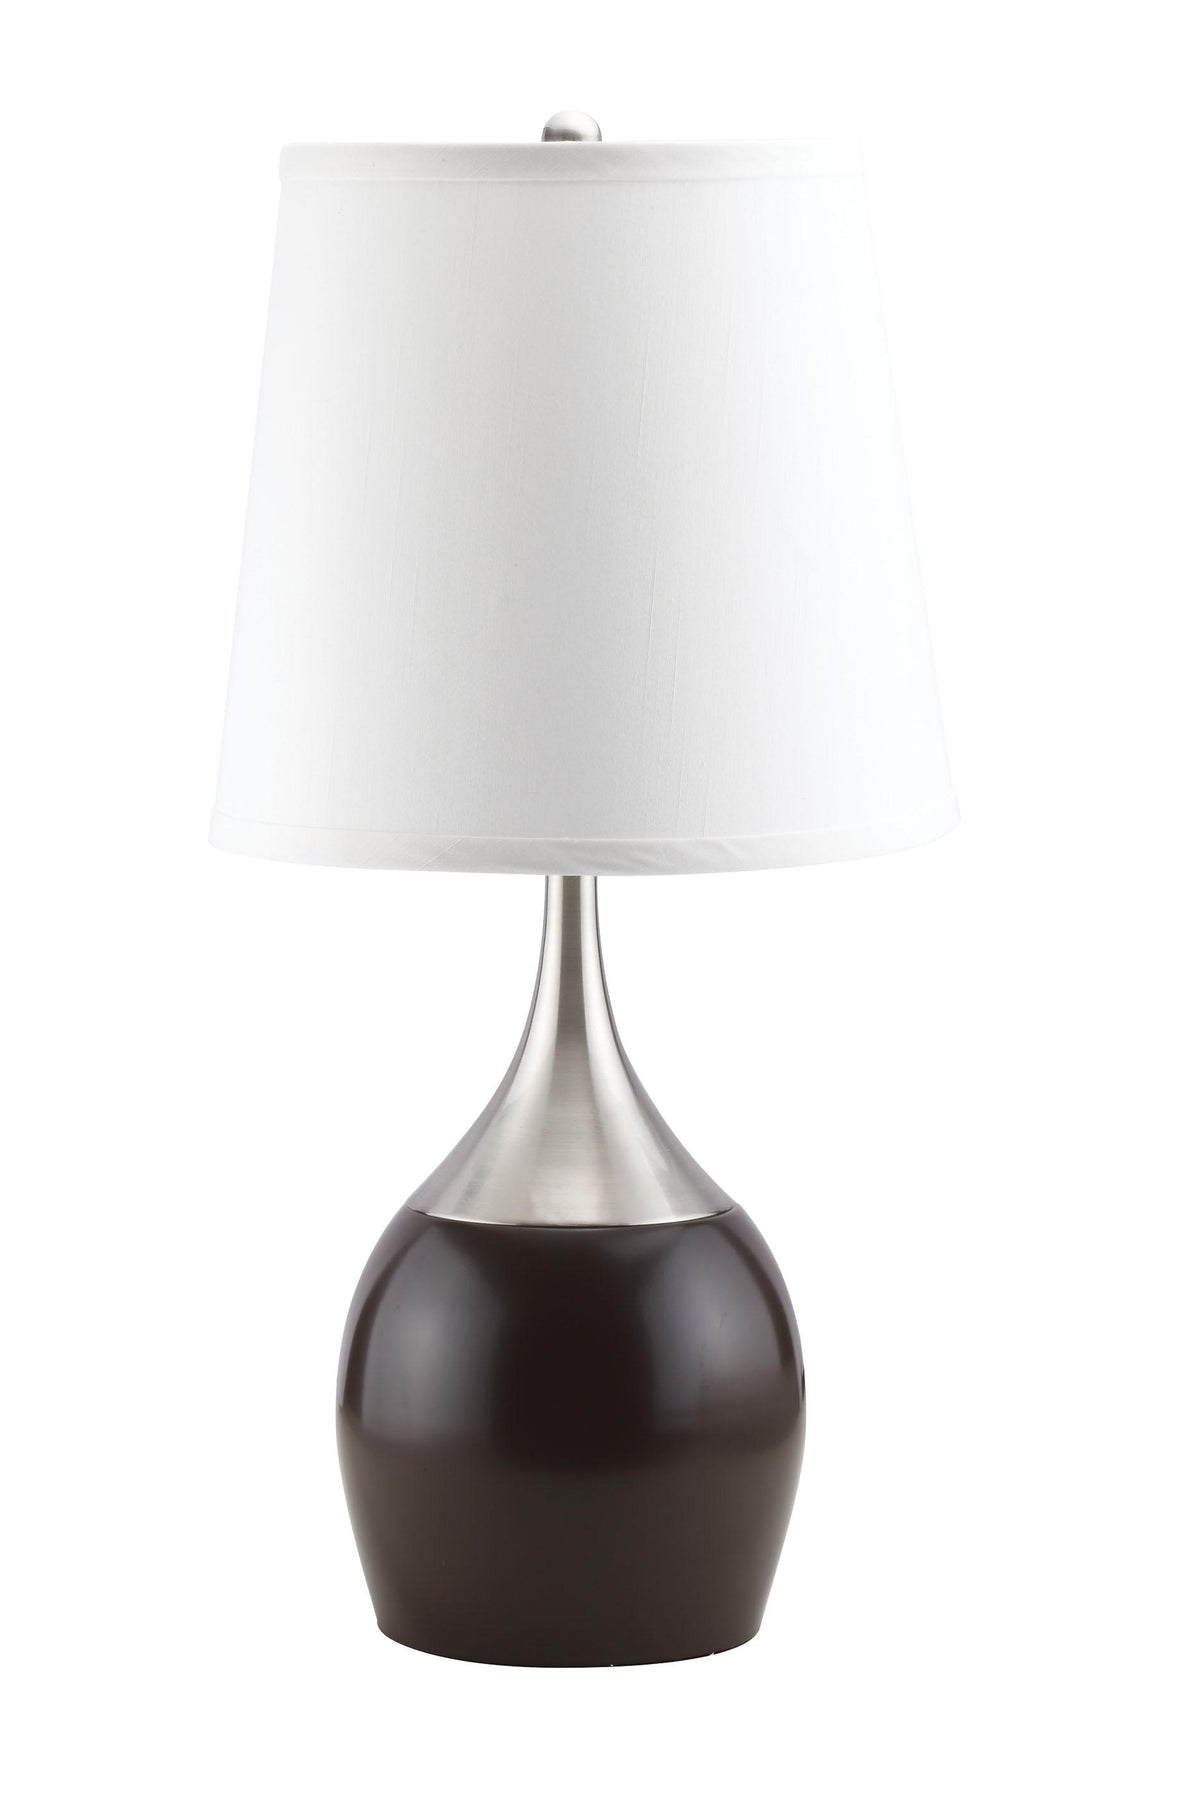 Willow Brushed Silver, Espresso Table Lamp  Half Price Furniture